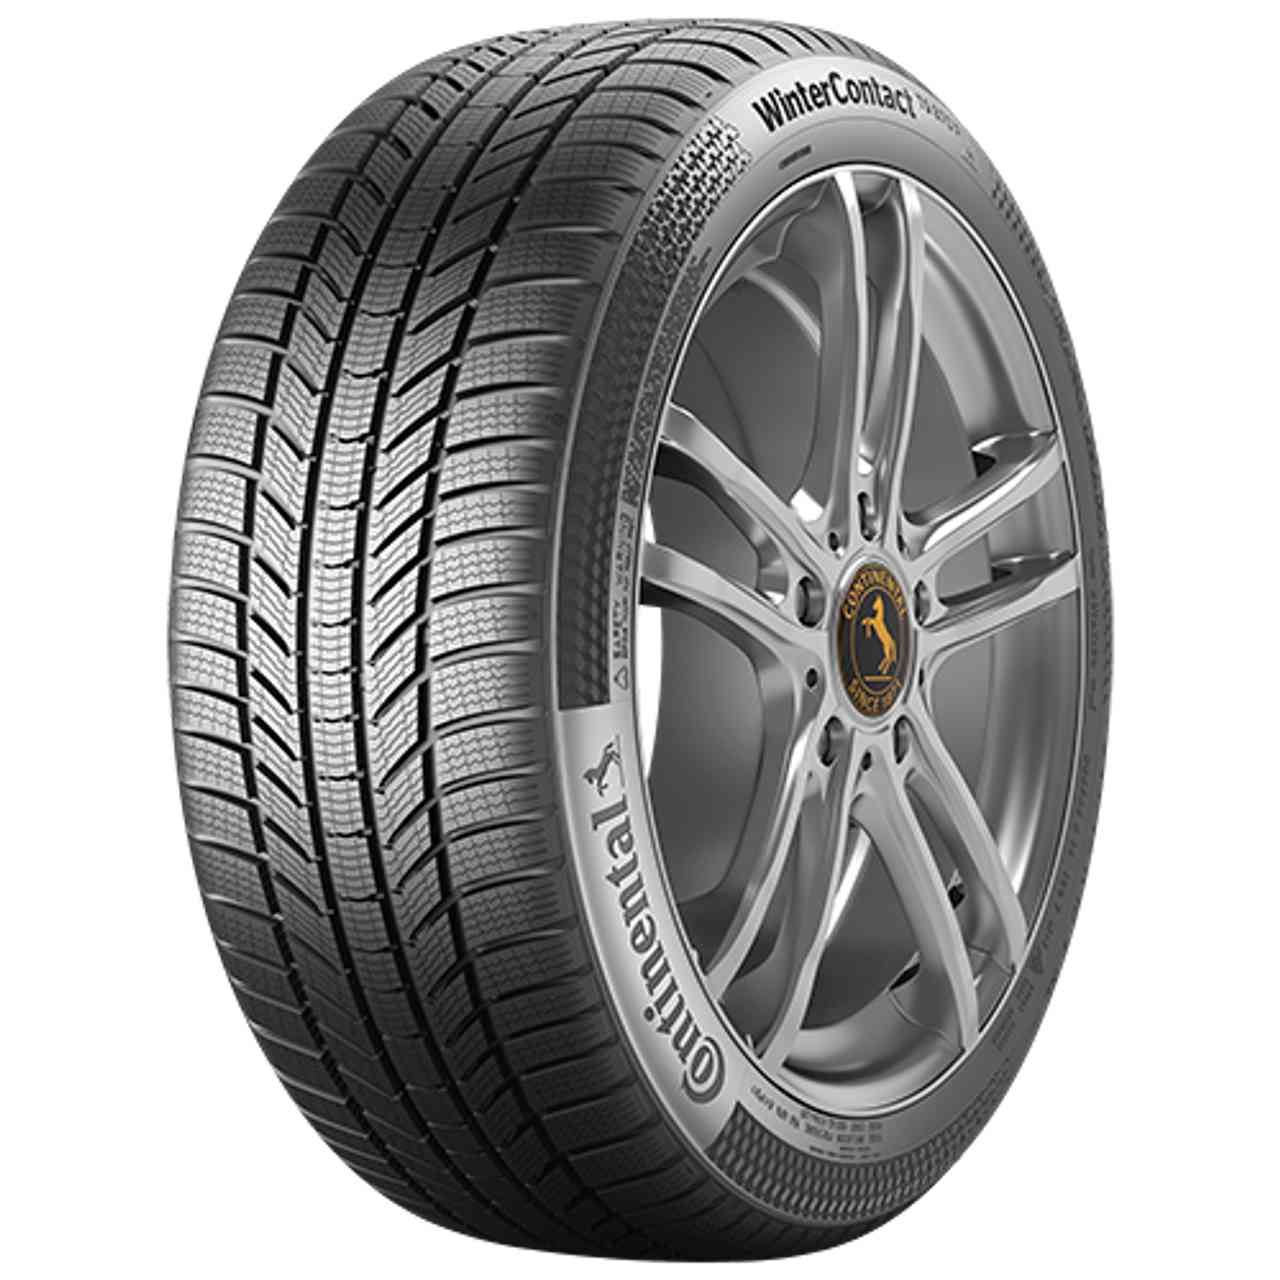 CONTINENTAL WINTERCONTACT TS 870 P (EVc) 255/45R20 105V FR BSW von Continental